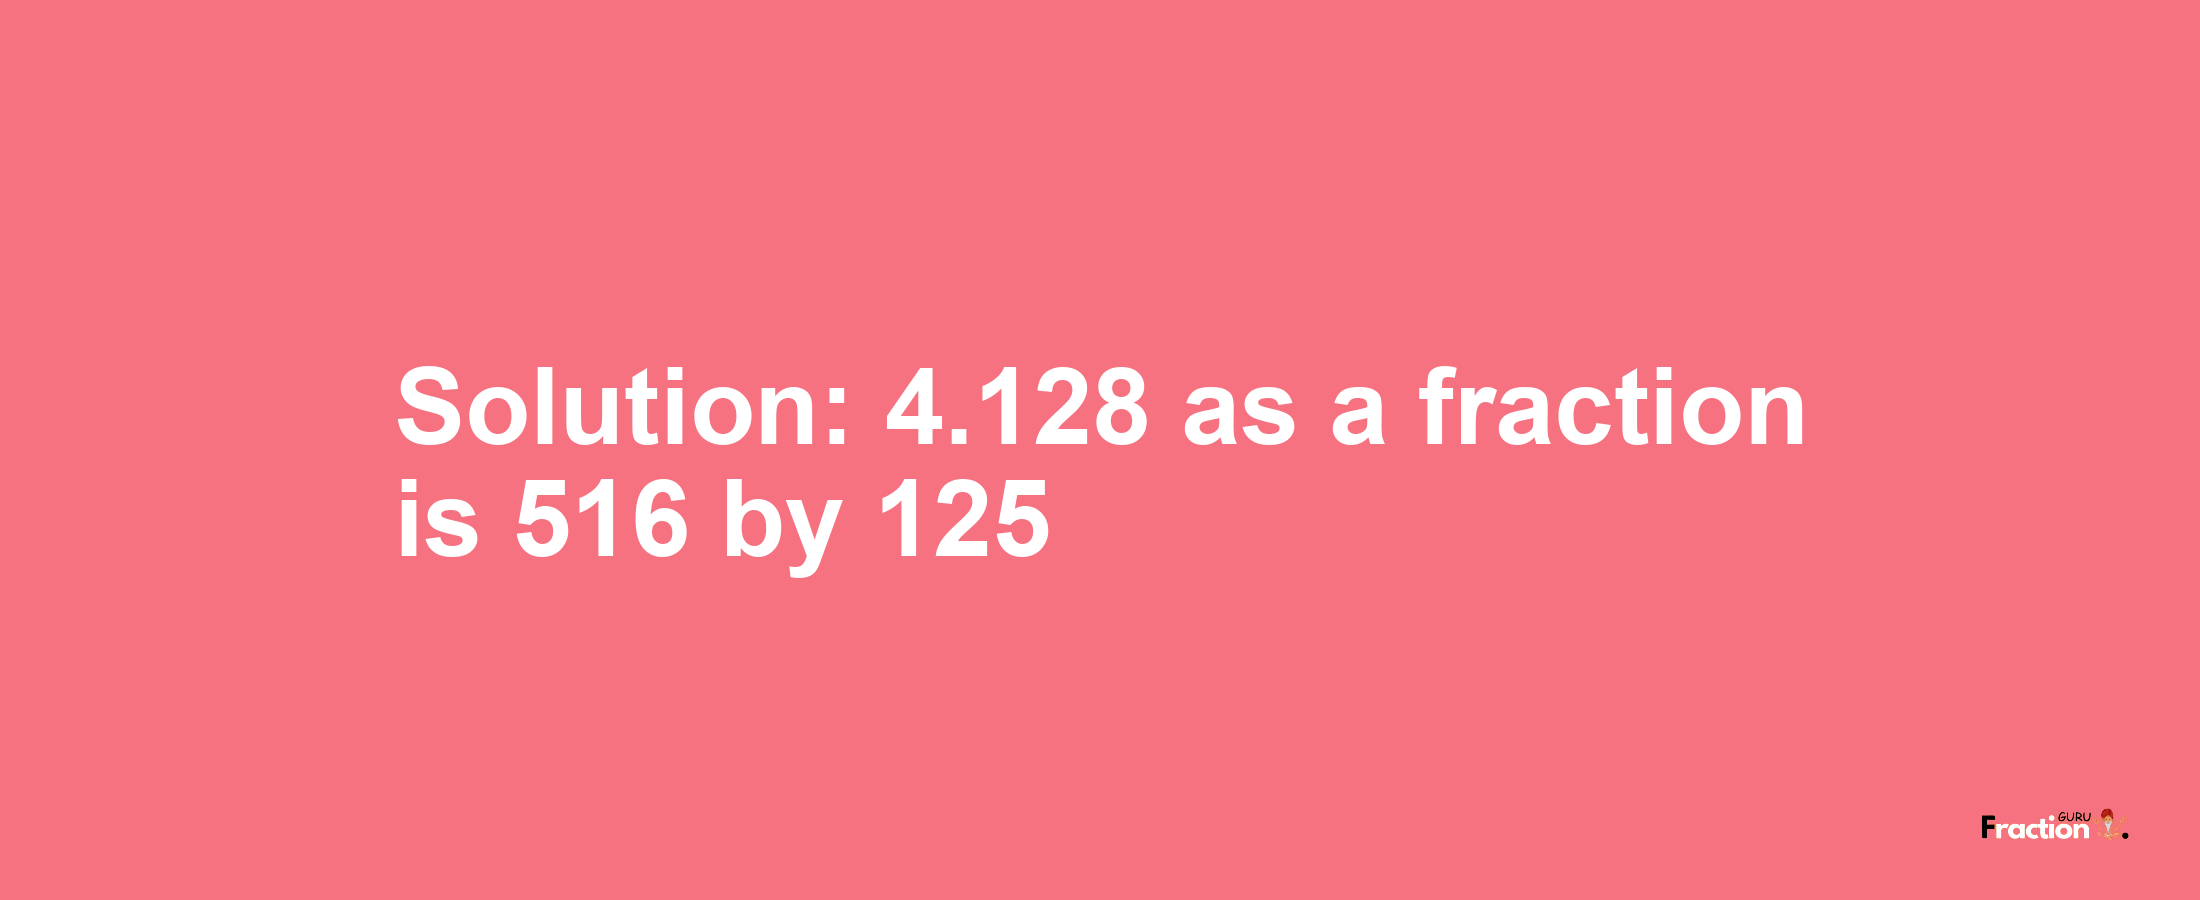 Solution:4.128 as a fraction is 516/125